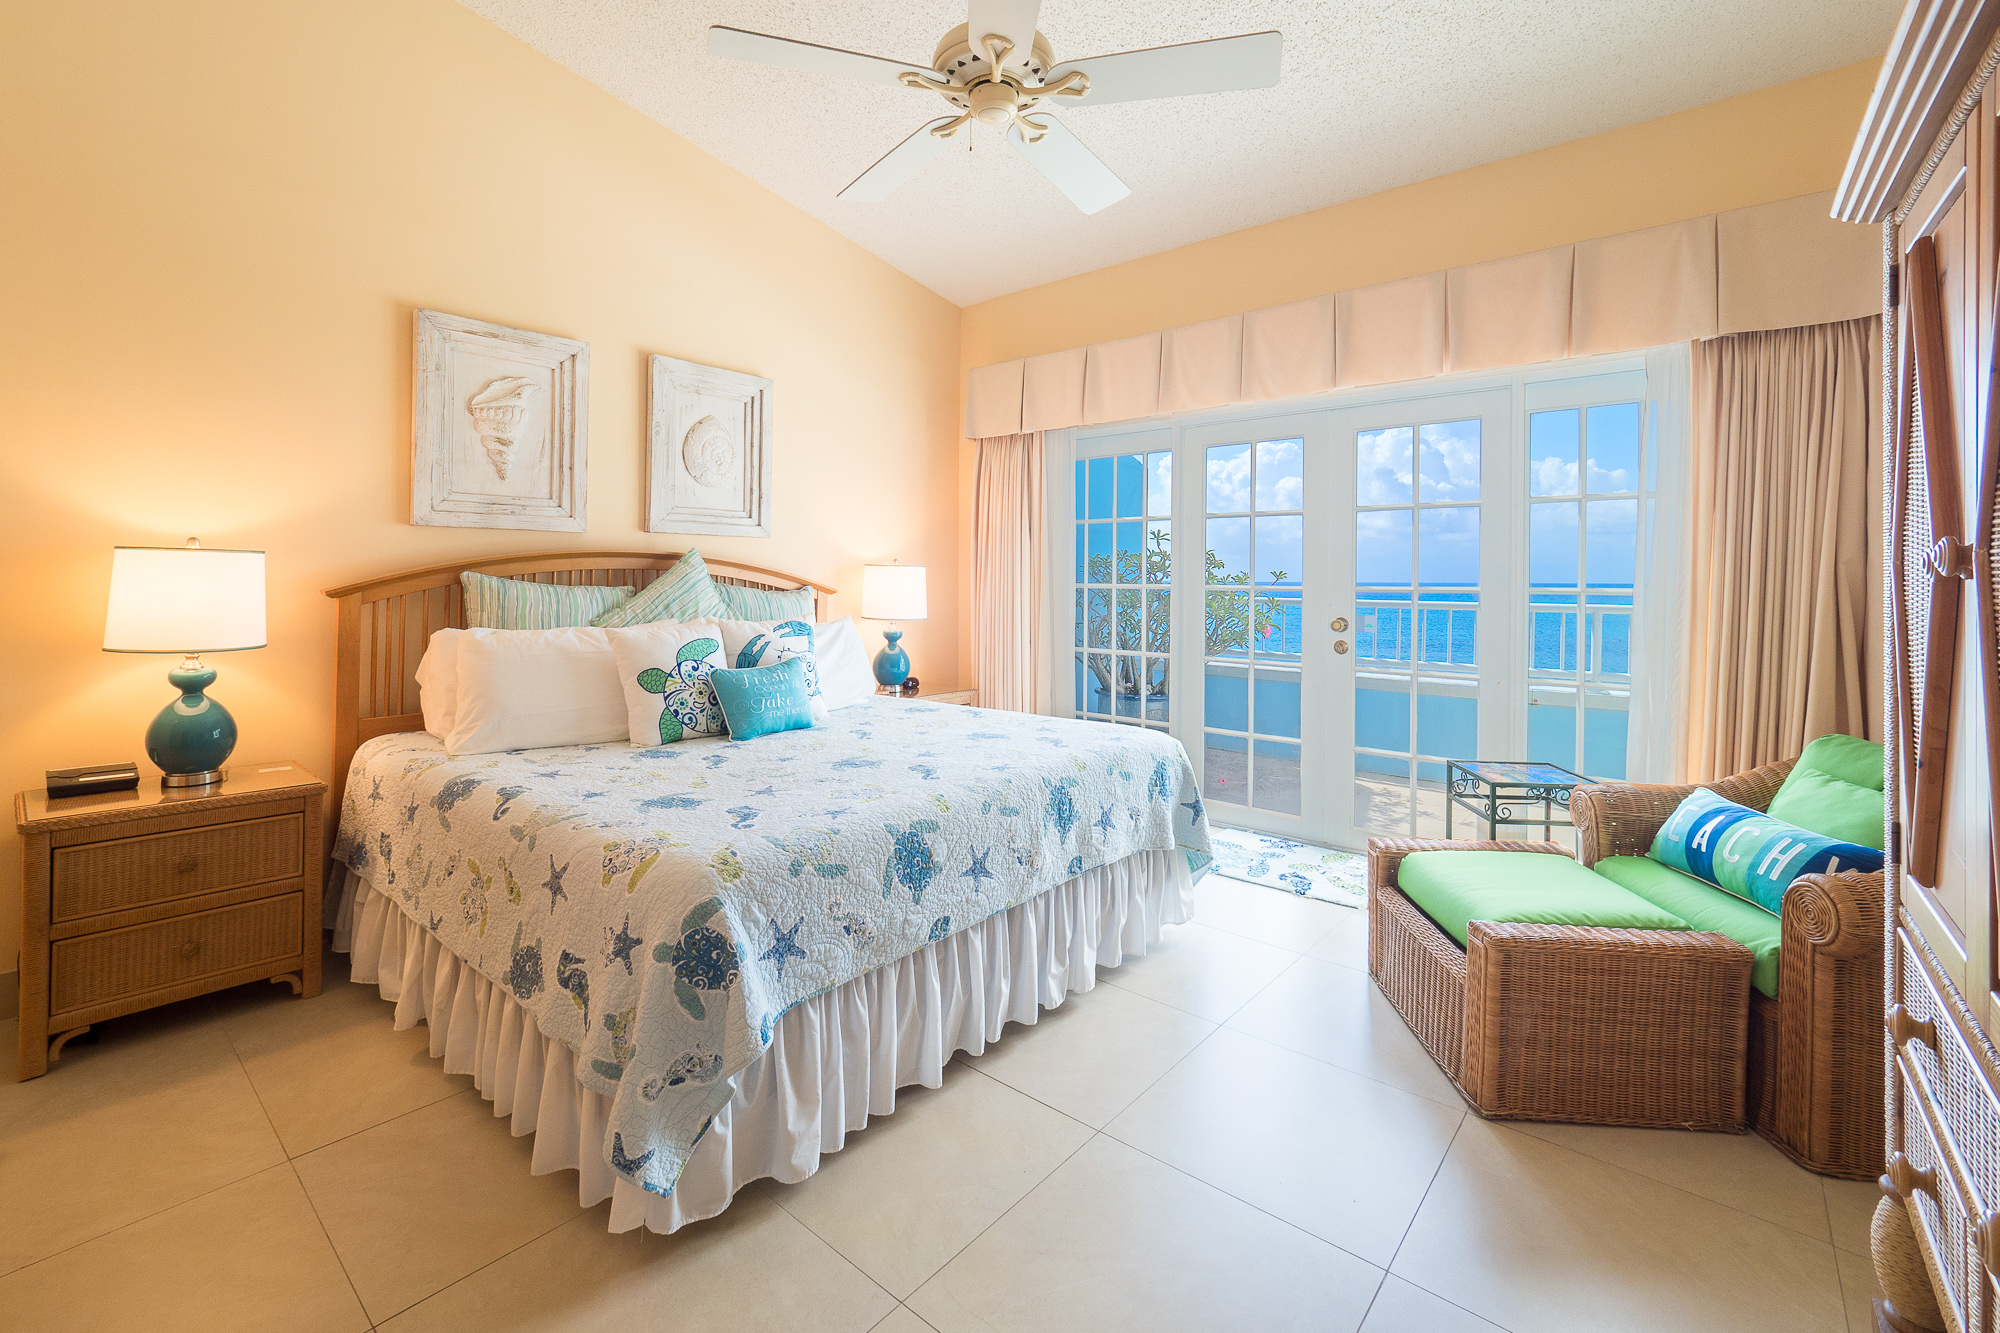 Master bedroom with grand views of the ocean